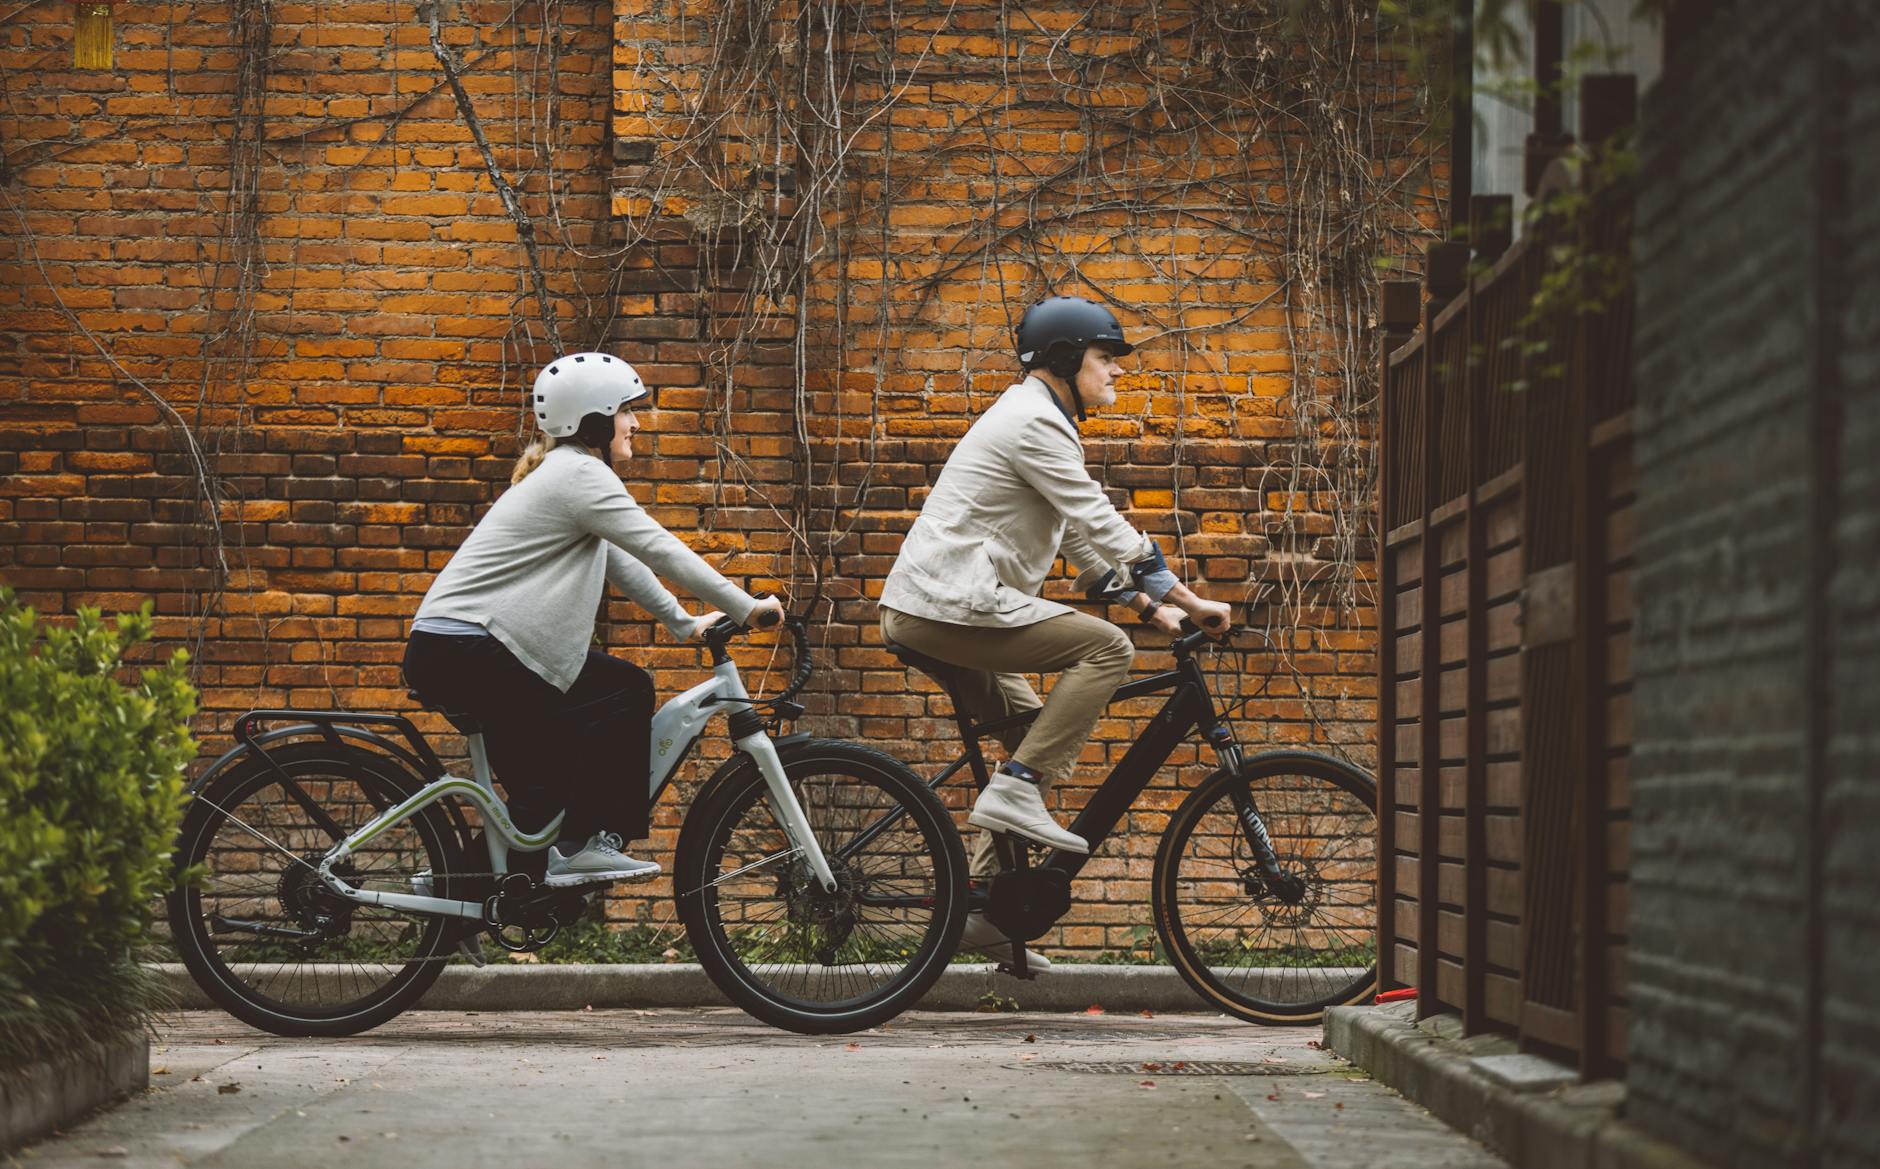 Two people riding bicycles in front of a brick wall